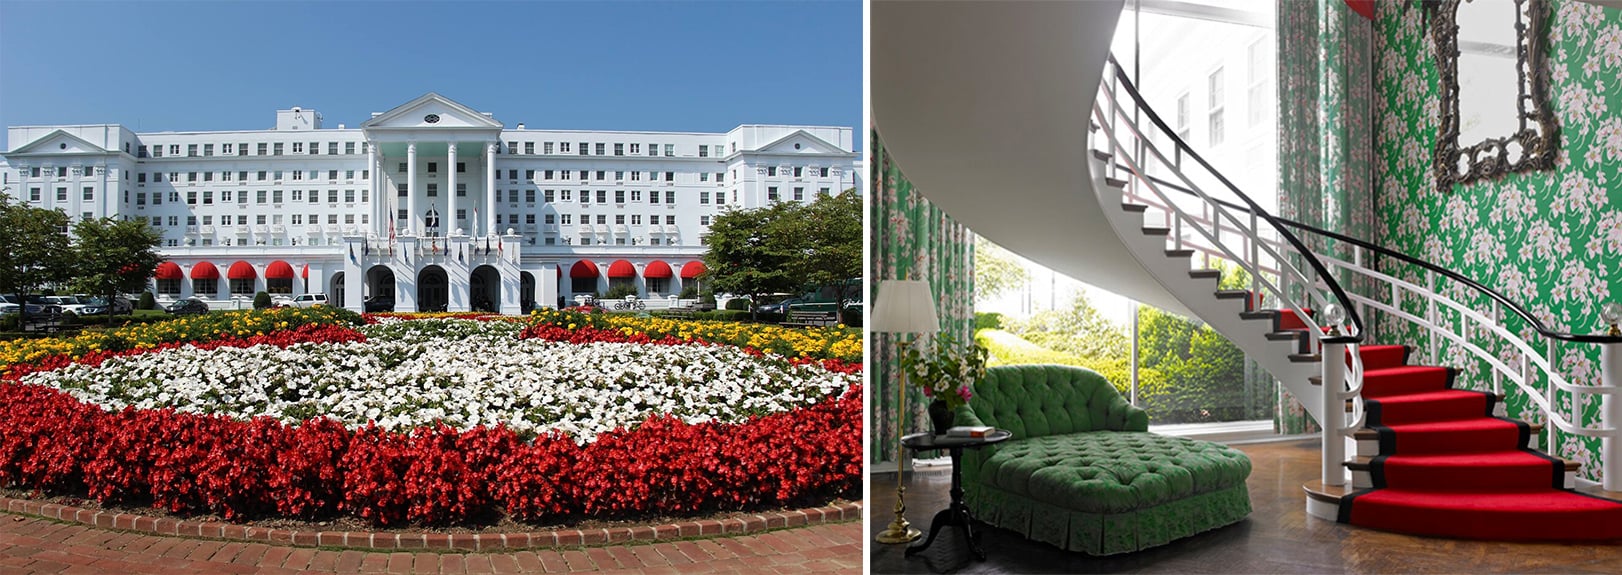 THE GREENBRIER, WEST VIRGINIA